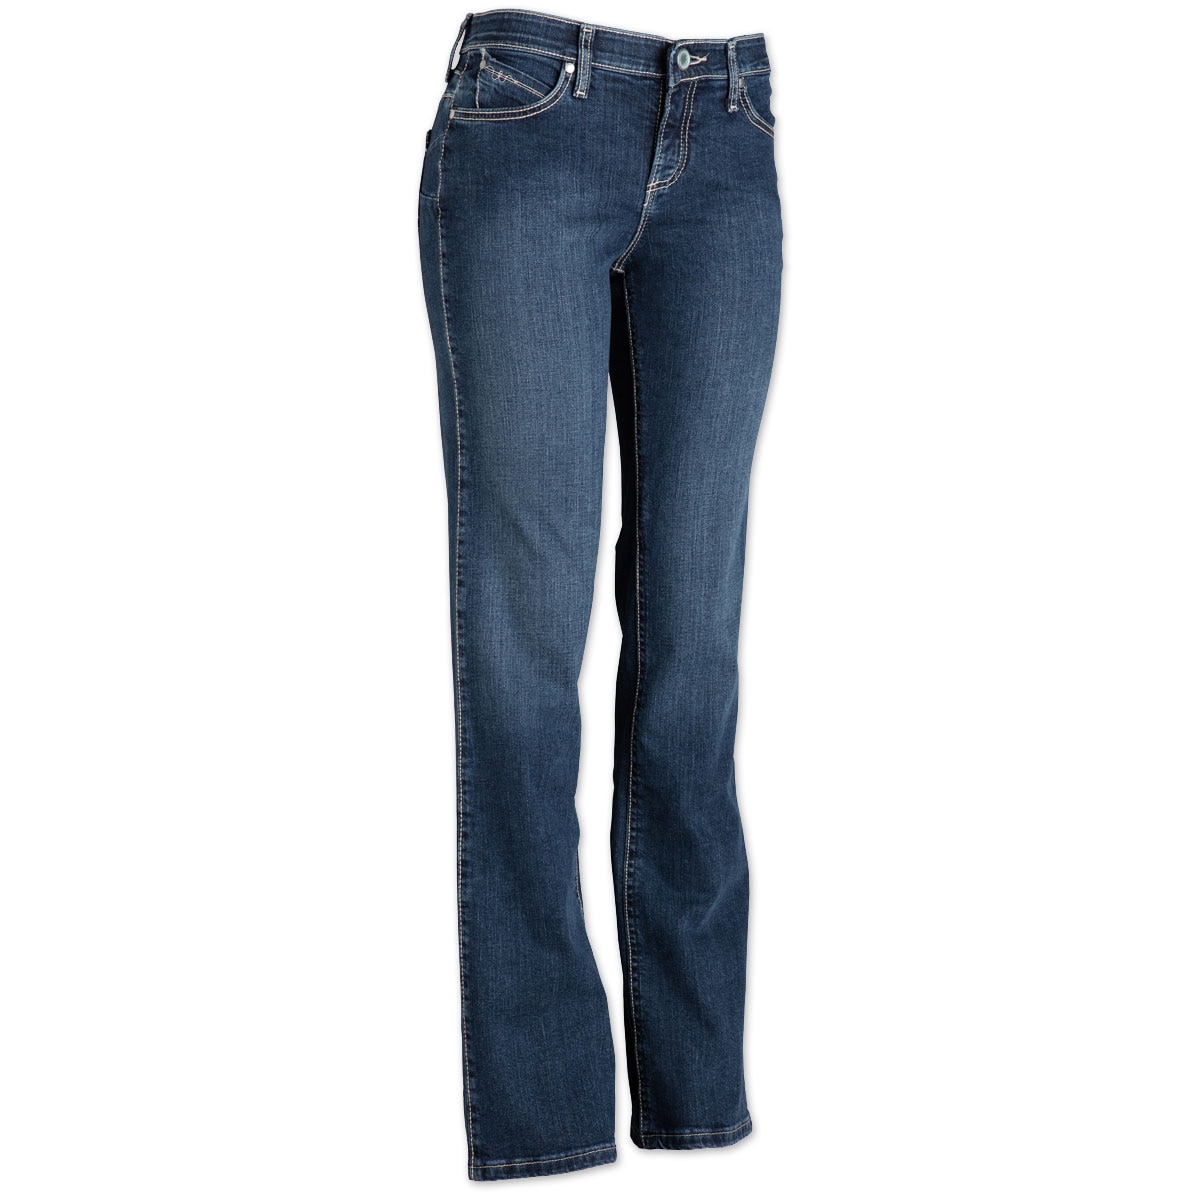 Wrangler Women's Q-Baby Booty-Up Jeans - Cowgirl Wash